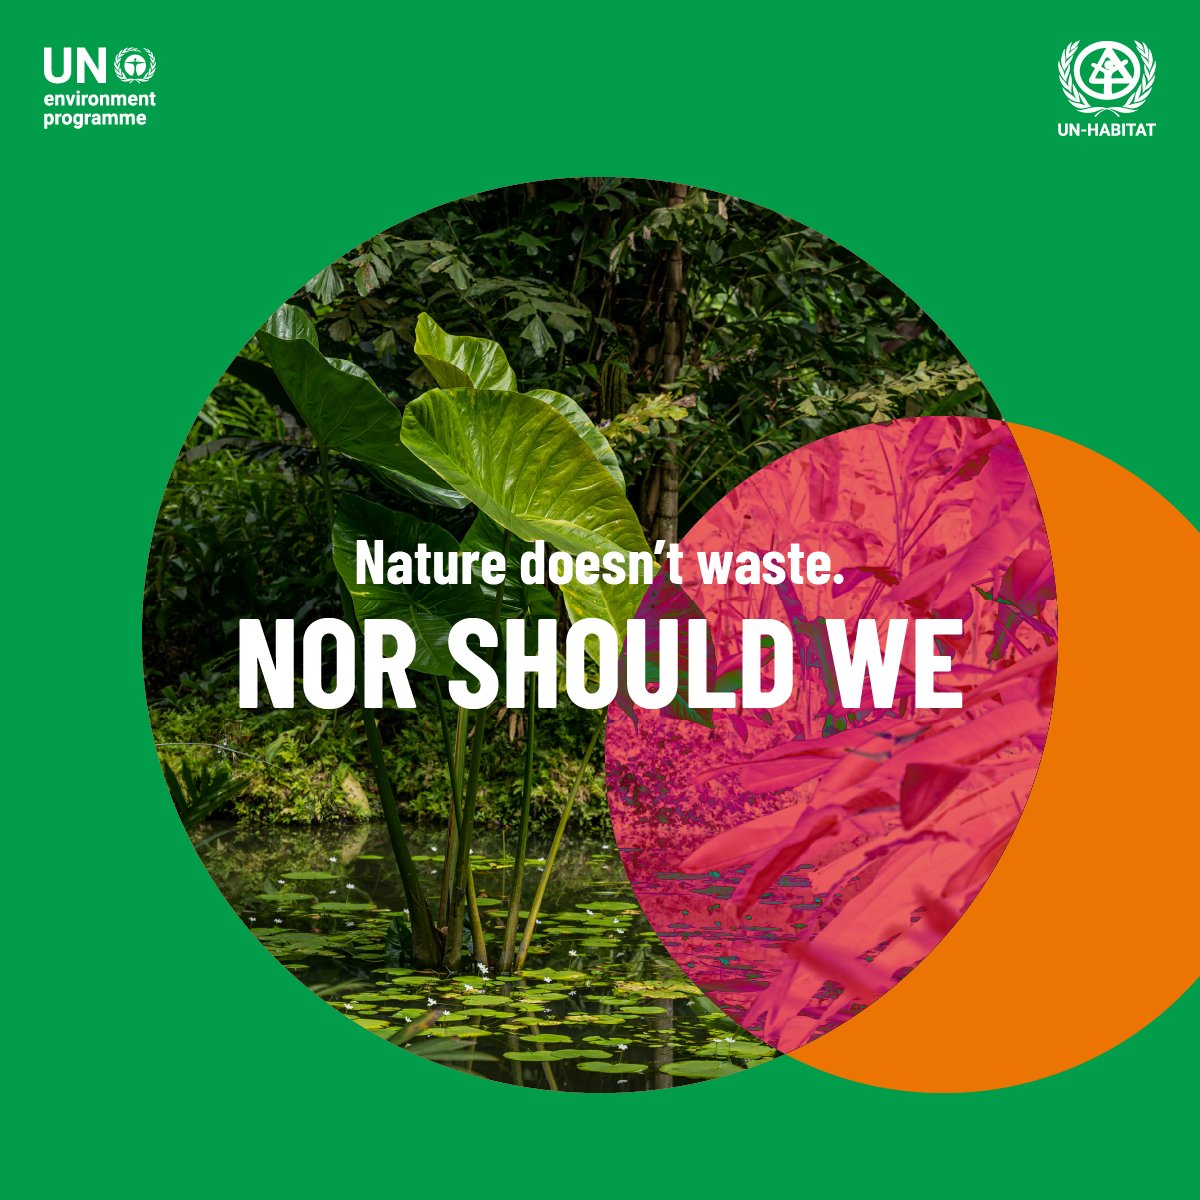 From governments and businesses to consumers – everyone can play their part to prevent and #BeatWastePollution. 30 March is #ZeroWasteDay. Here’s what you need to know about the global waste crisis & ways to tackle it: unep.org/events/un-day/…